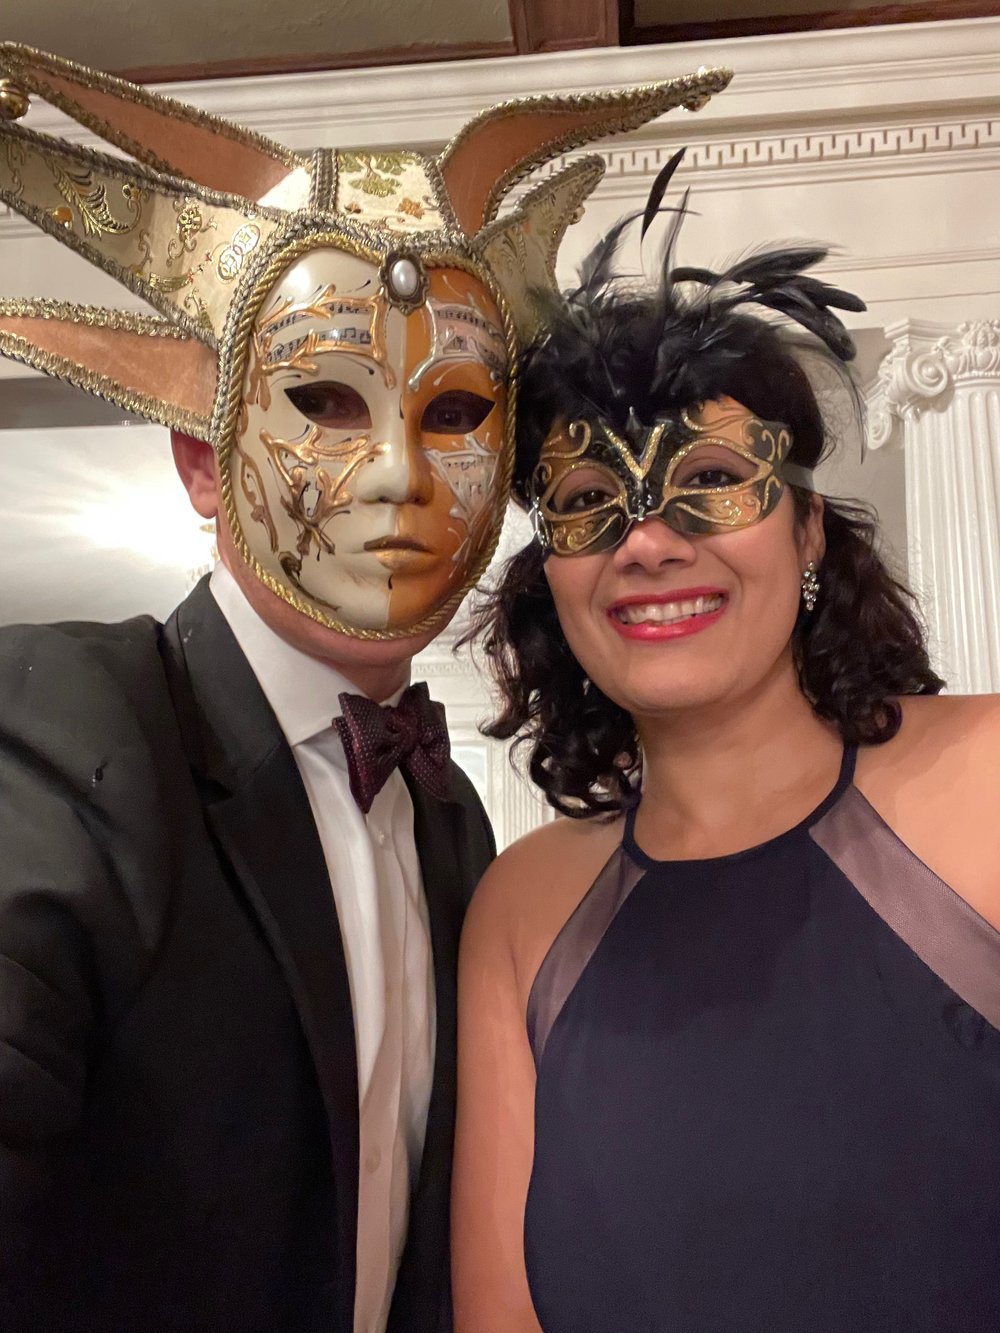 We wanted to give a huge thank you to everyone who joined us at our annual Masquerade  Ball. — Ballroom Dance of NJ